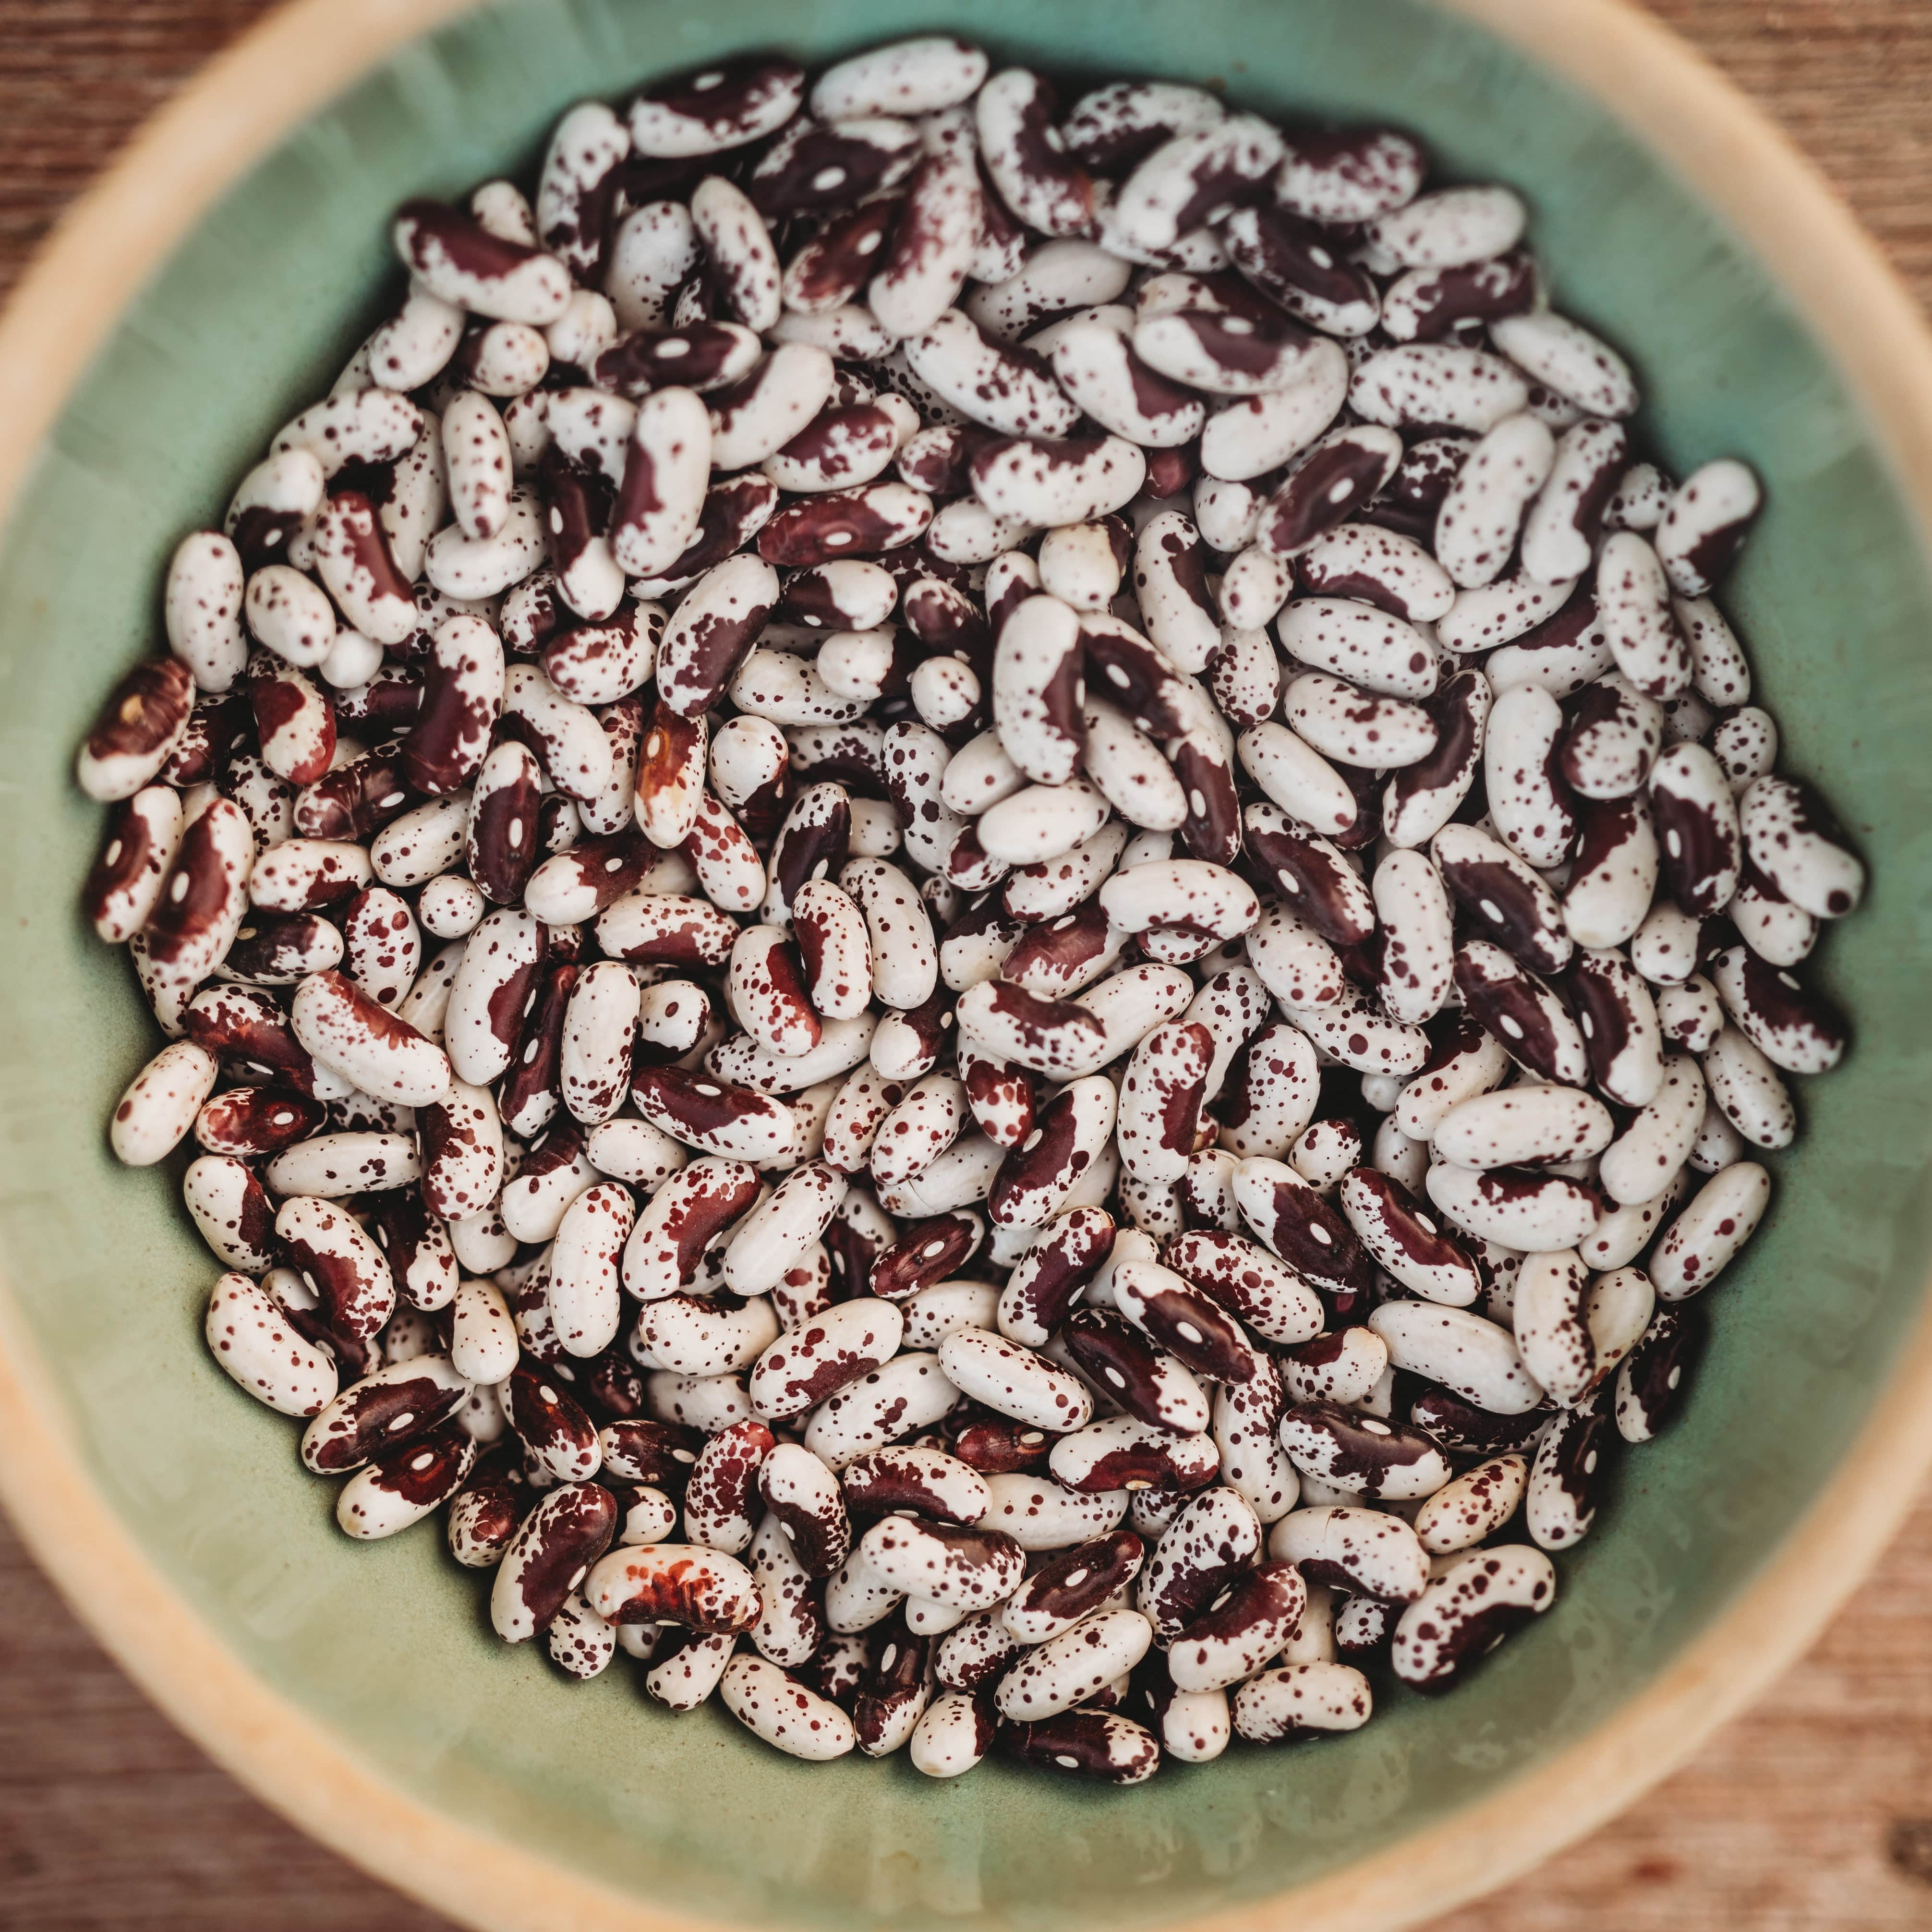 Jacob's Cattle Shelling Bean Seeds